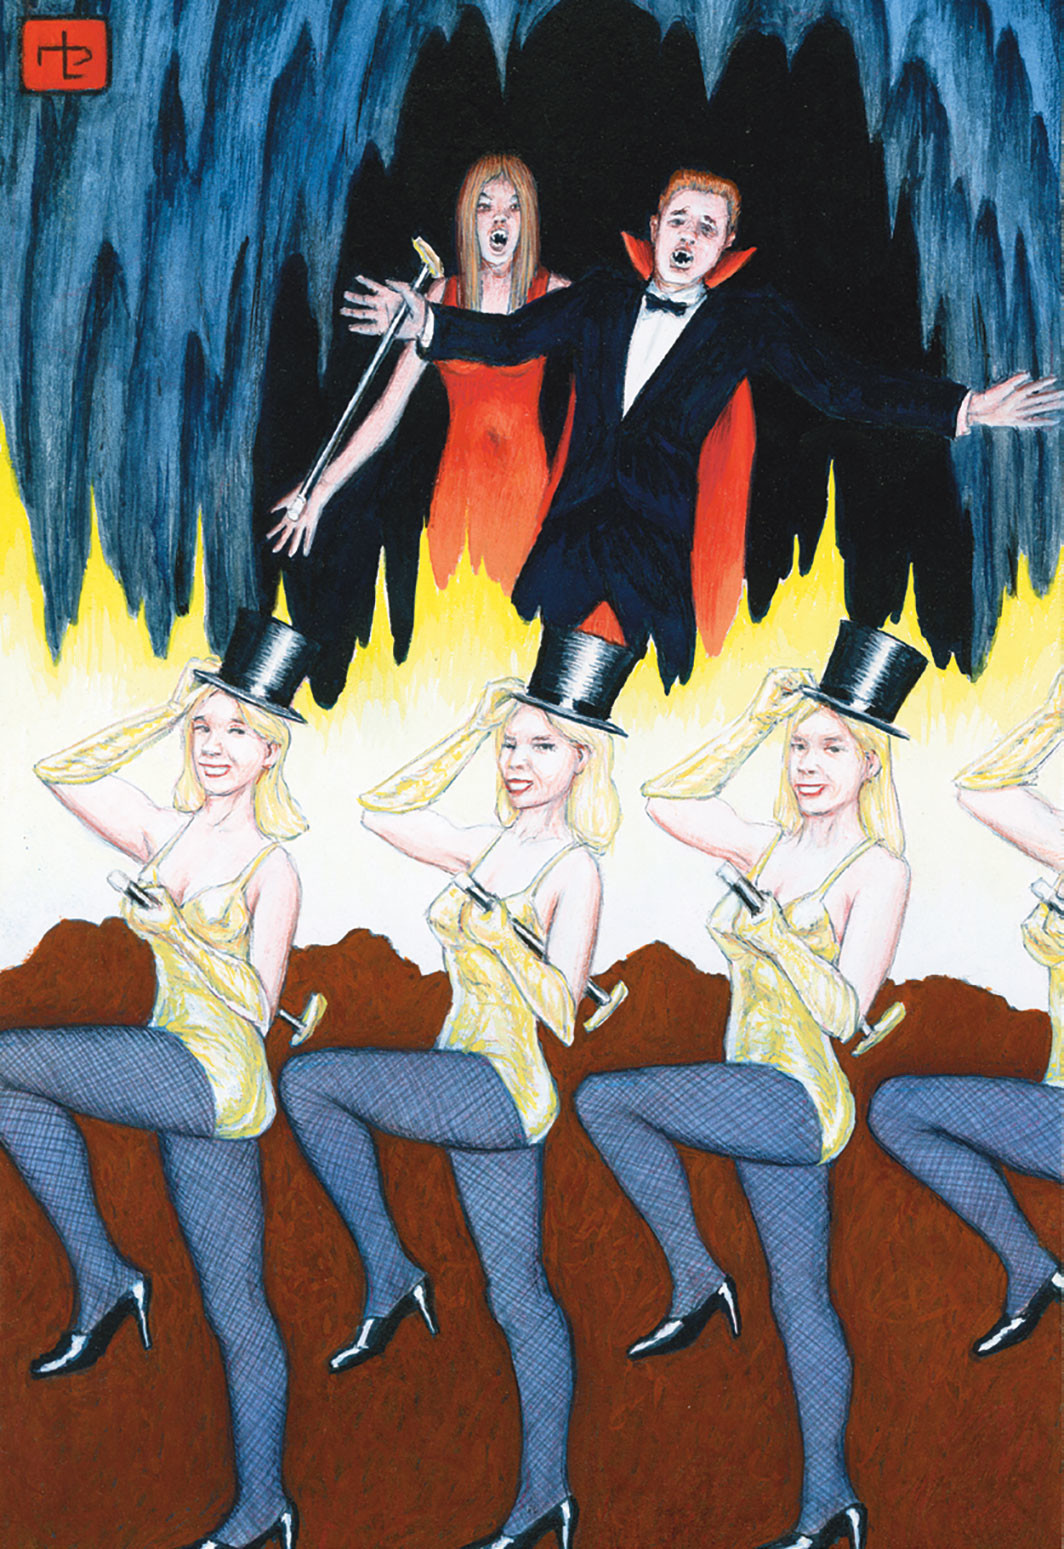 Jim Shaw, Dream Object: Paperback Cover (Dancers), 2009, gouache on ragboard mounted on plywood, 9 1⁄4 × 6 1⁄4". Courtesy the artist and Metro Pictures, New York